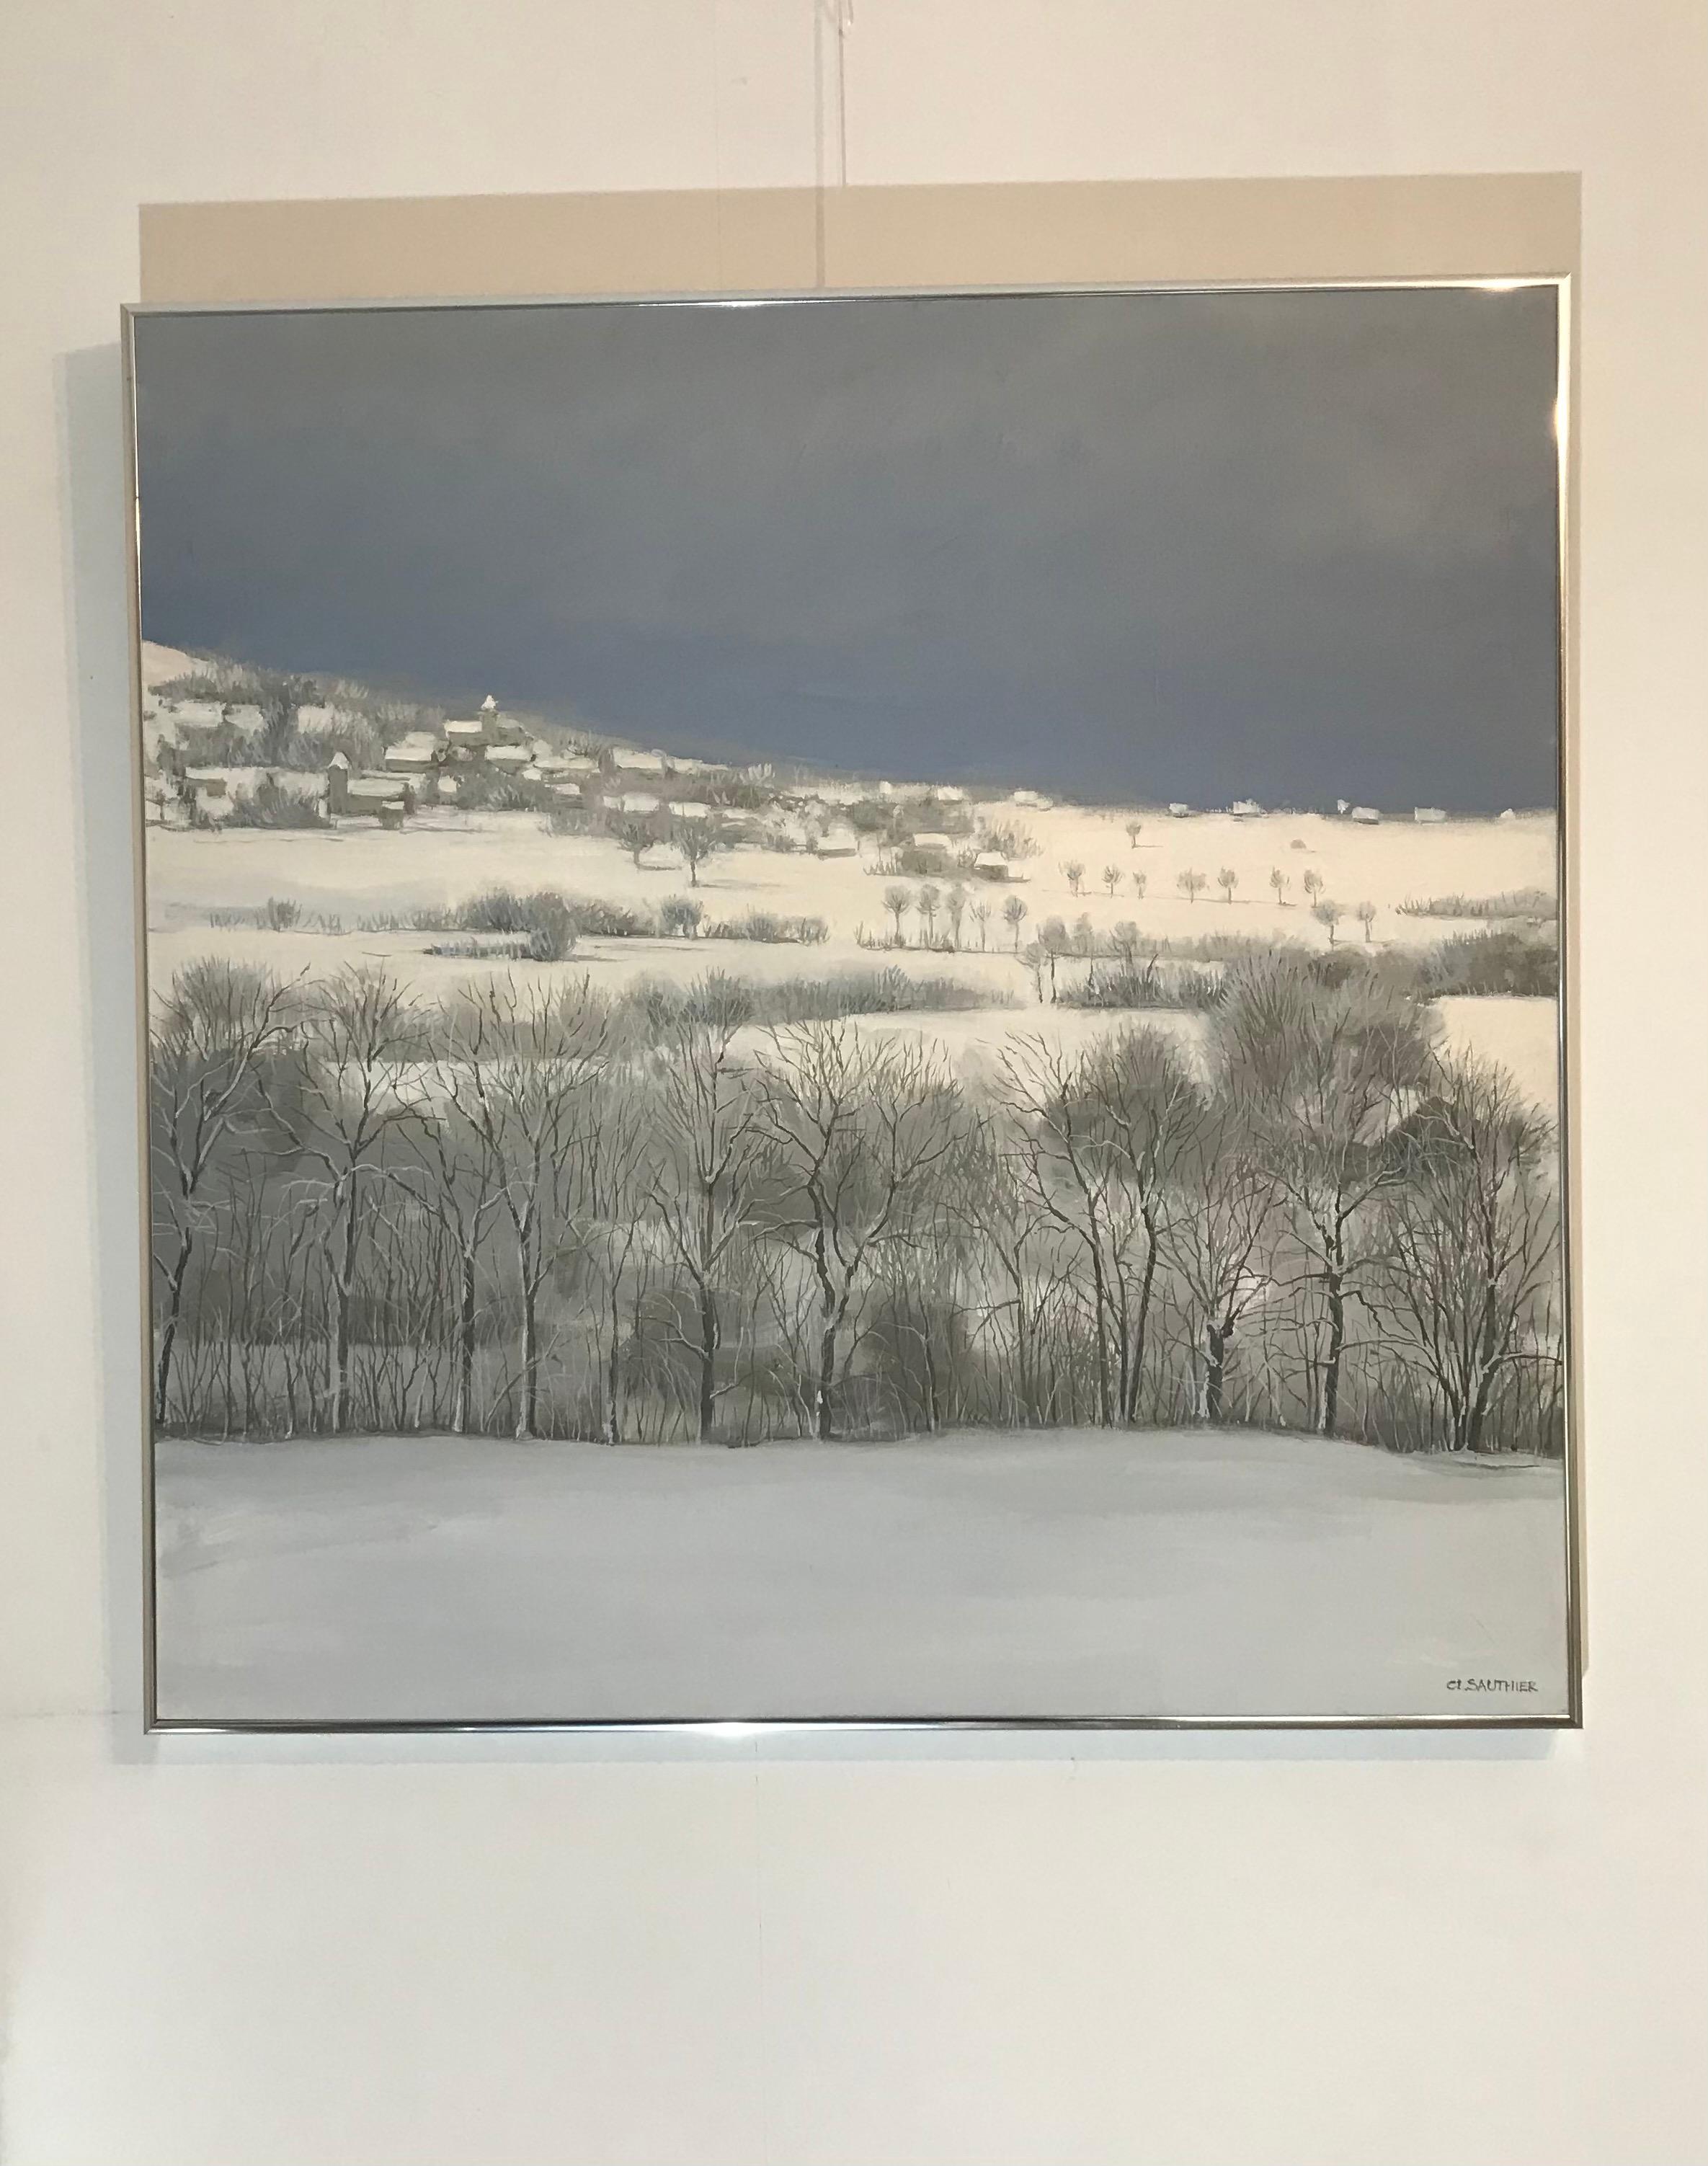 Snowy landscape, Pressilly, Haute-Savoie - Painting by Claude Sauthier